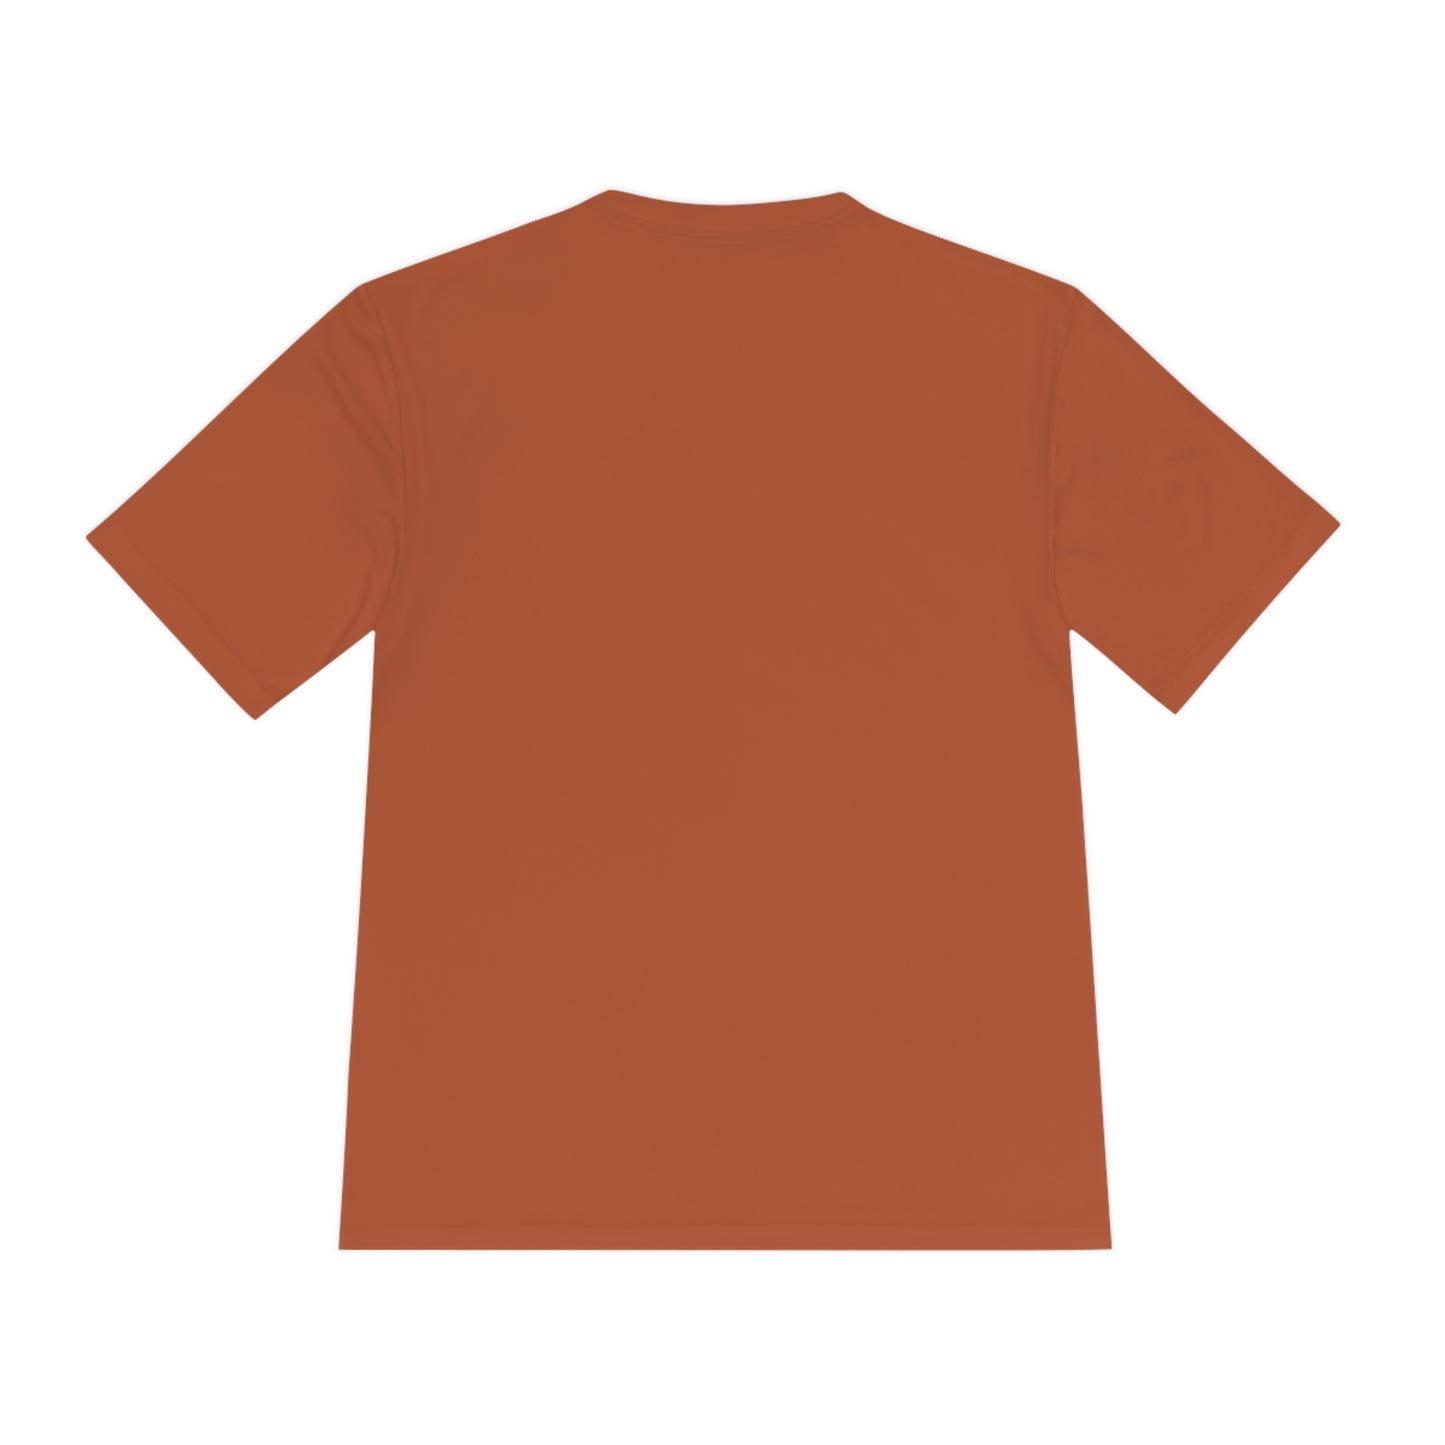 Perry Hill Campfire Jersey T